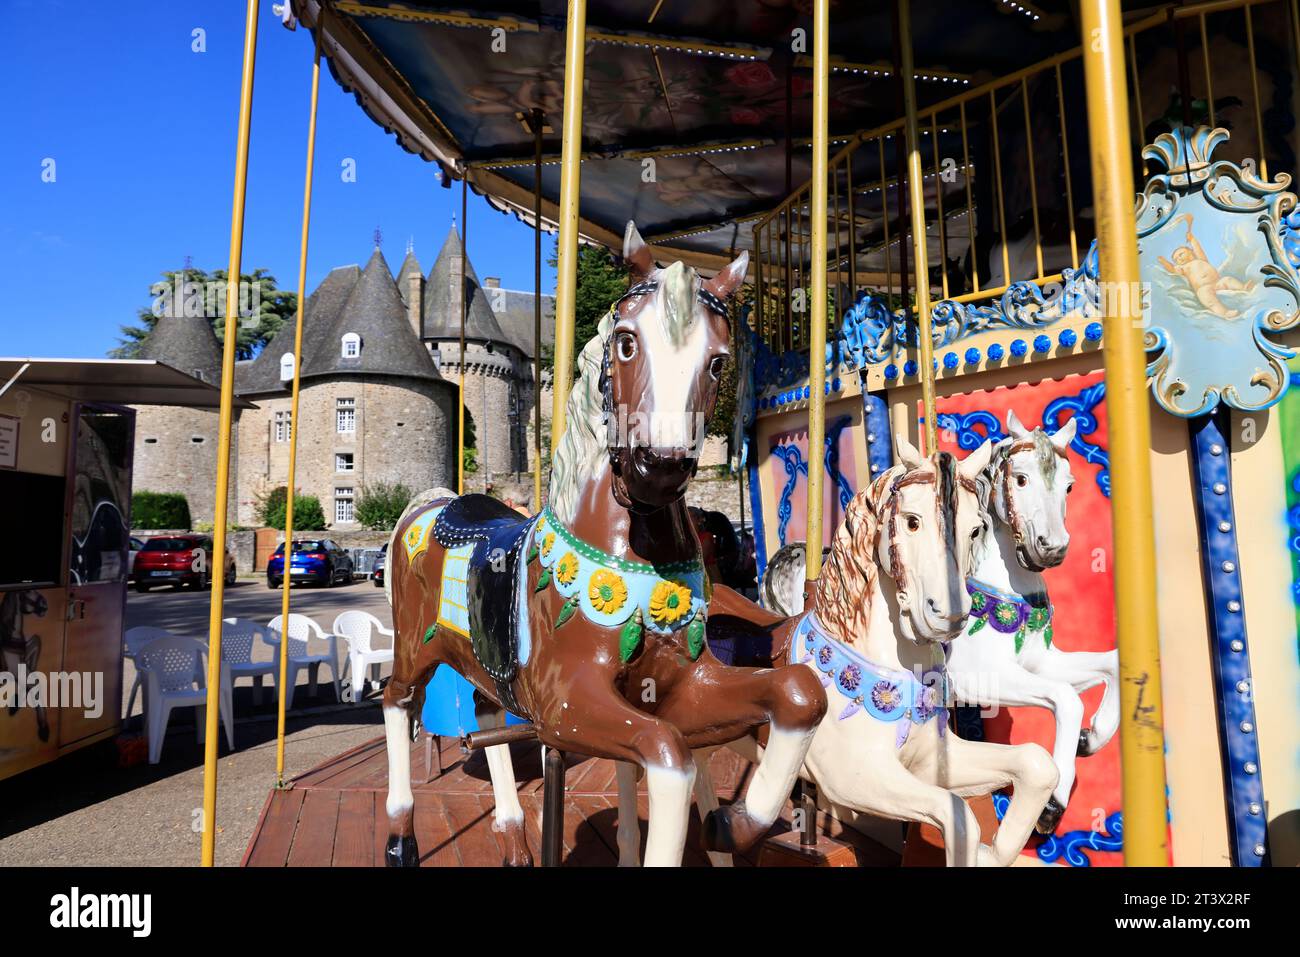 Wooden horses from the carousel in front of the Château de Pompadour, the City of Horses. Arnac-Pompadour, Corrèze, Limousin, France, Europe. Photo by Stock Photo